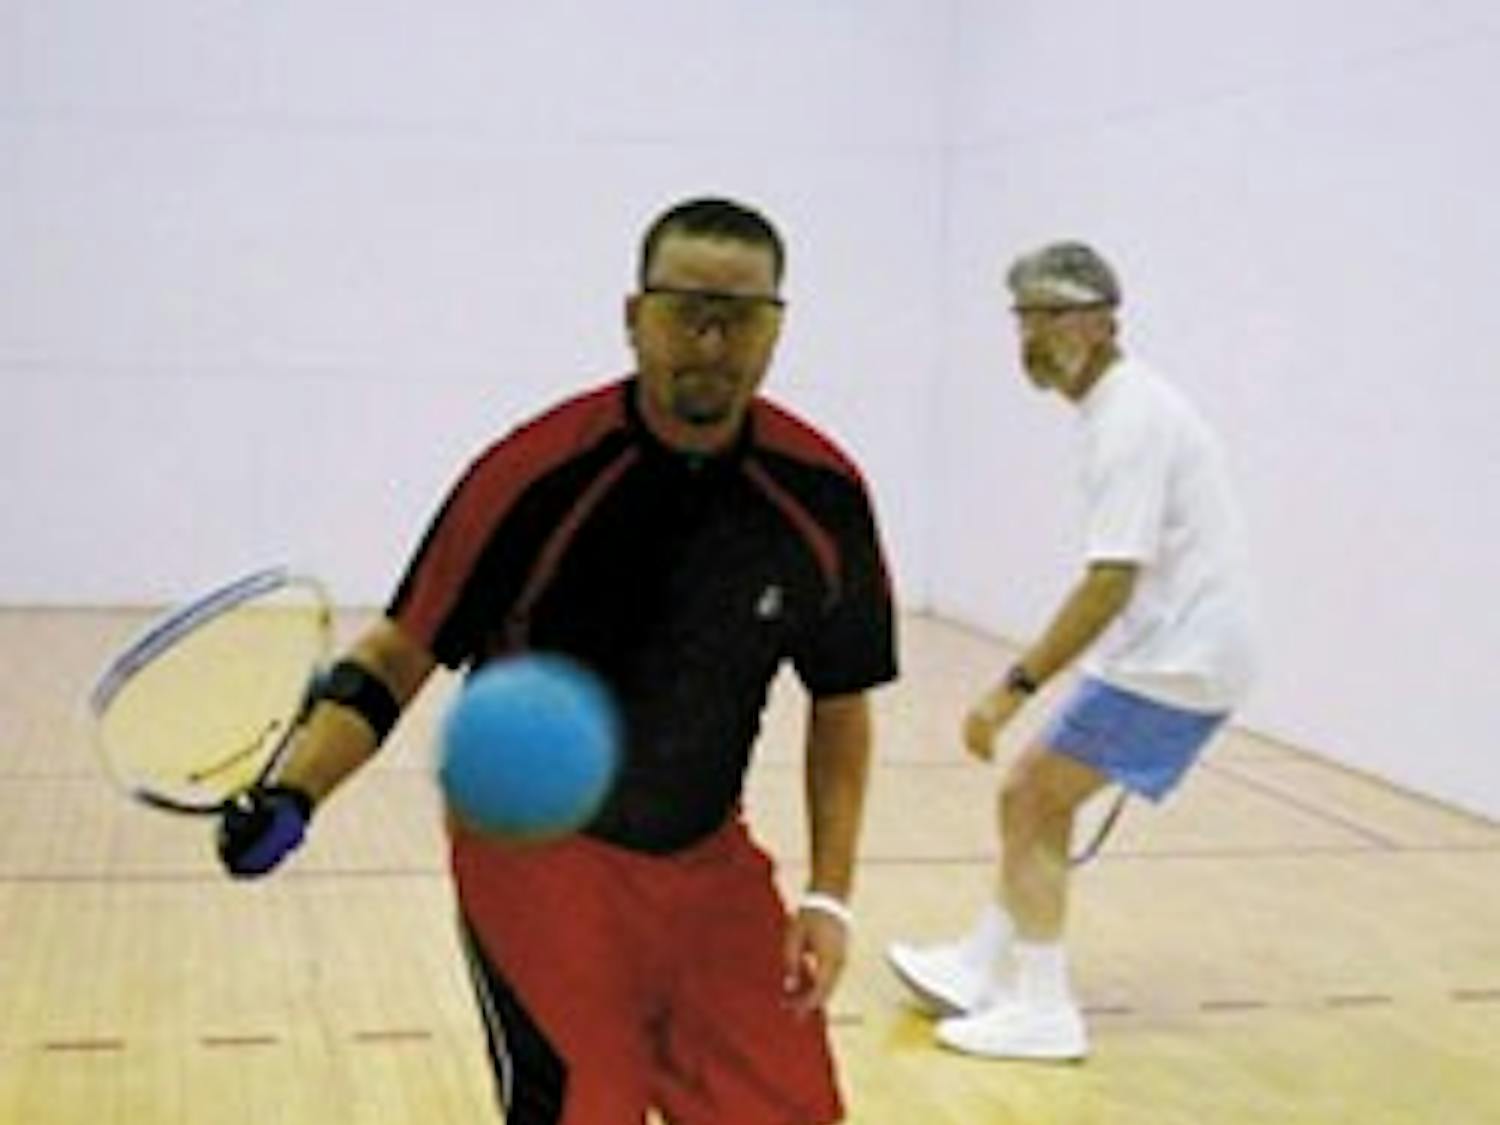 Tim Garcia, center, gets ready to hit a shot while playing racquetball against UNM employee Tom Root at Johnson Center on Friday. The two have been playing together for six years.